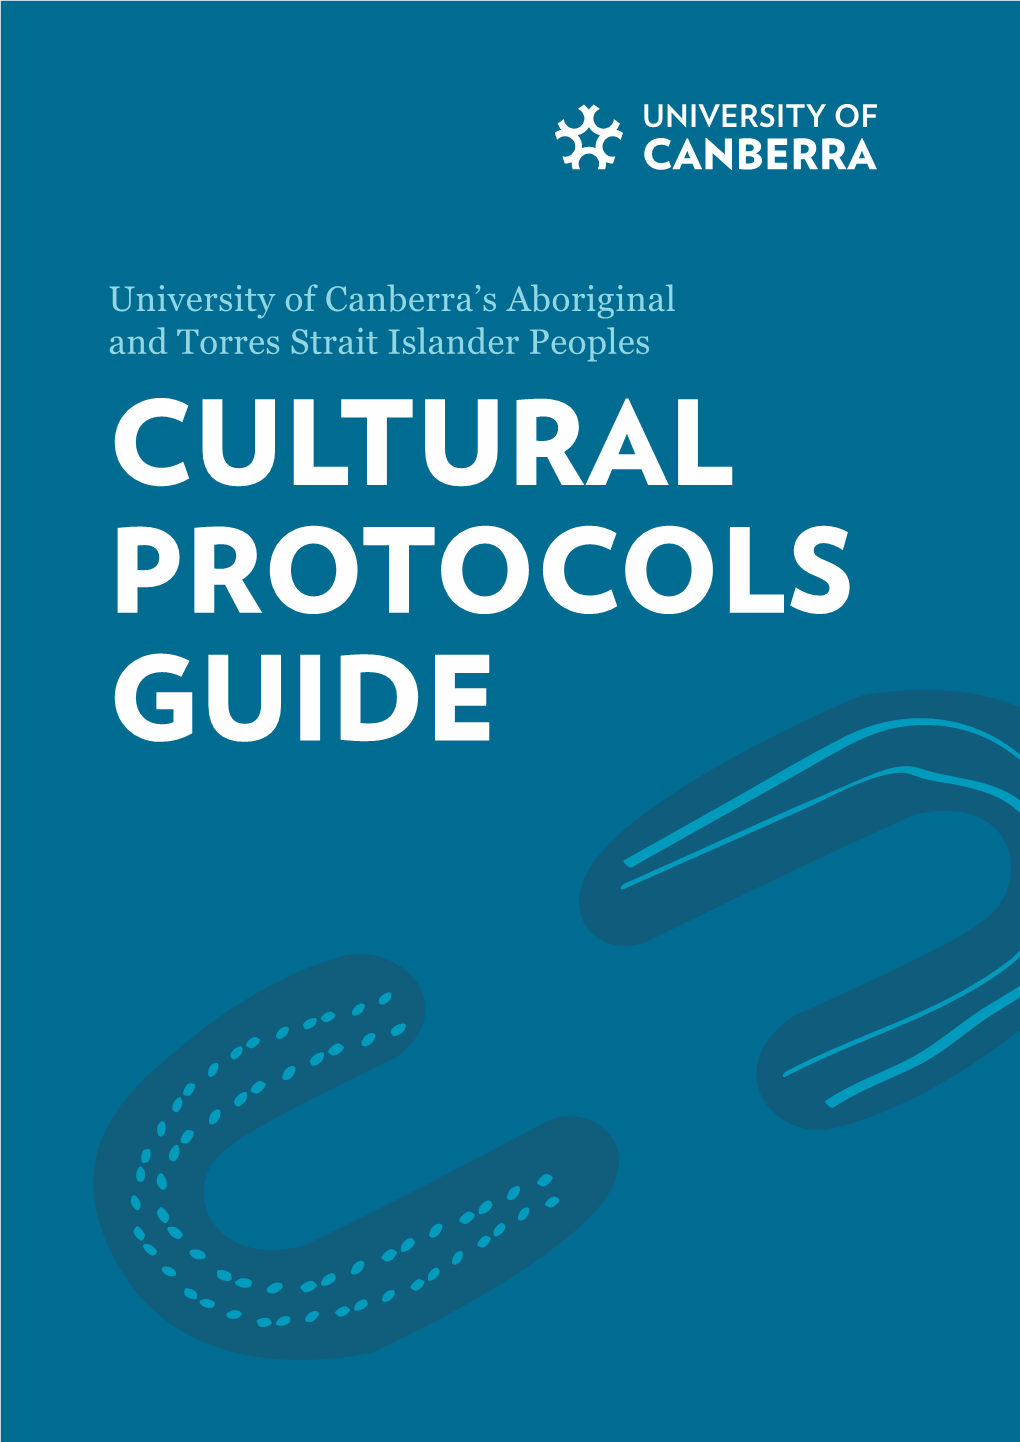 University of Canberra's Cultural Protocols Guide